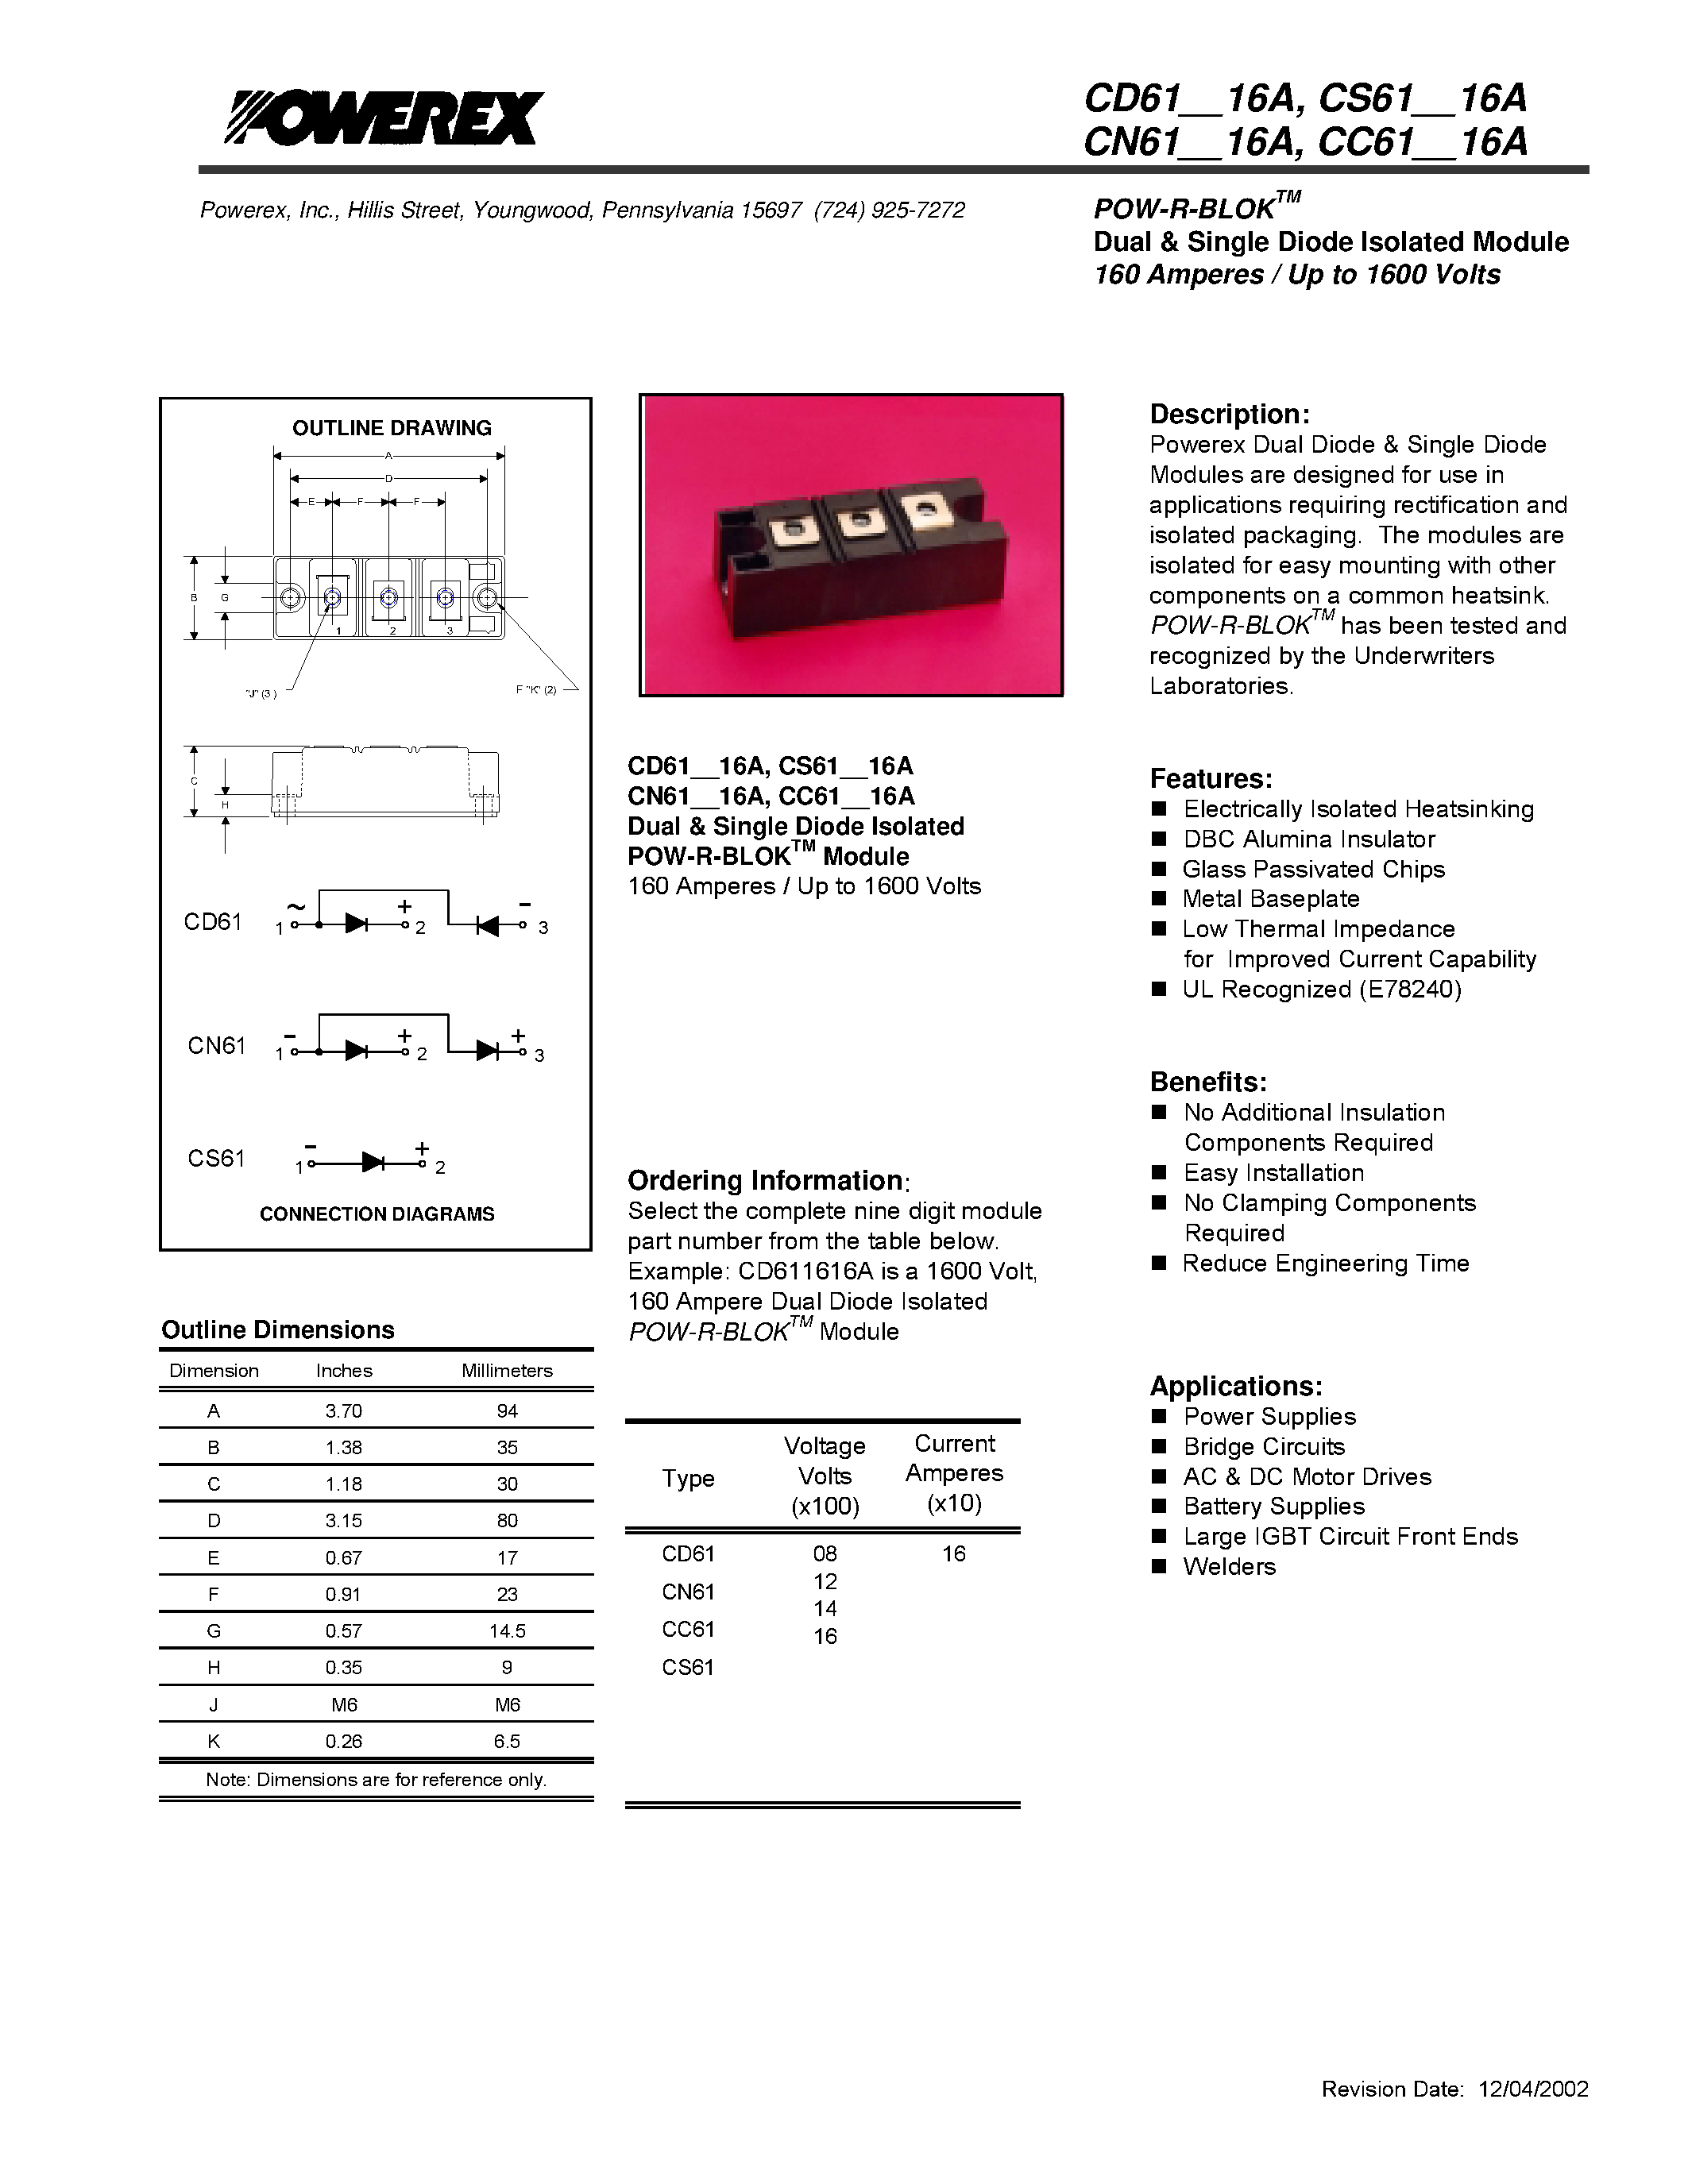 Даташит CD61-POW-R-BLOK Dual & Single Diode Isolated Module 160 Amperes / Up to 1600 Volts страница 1